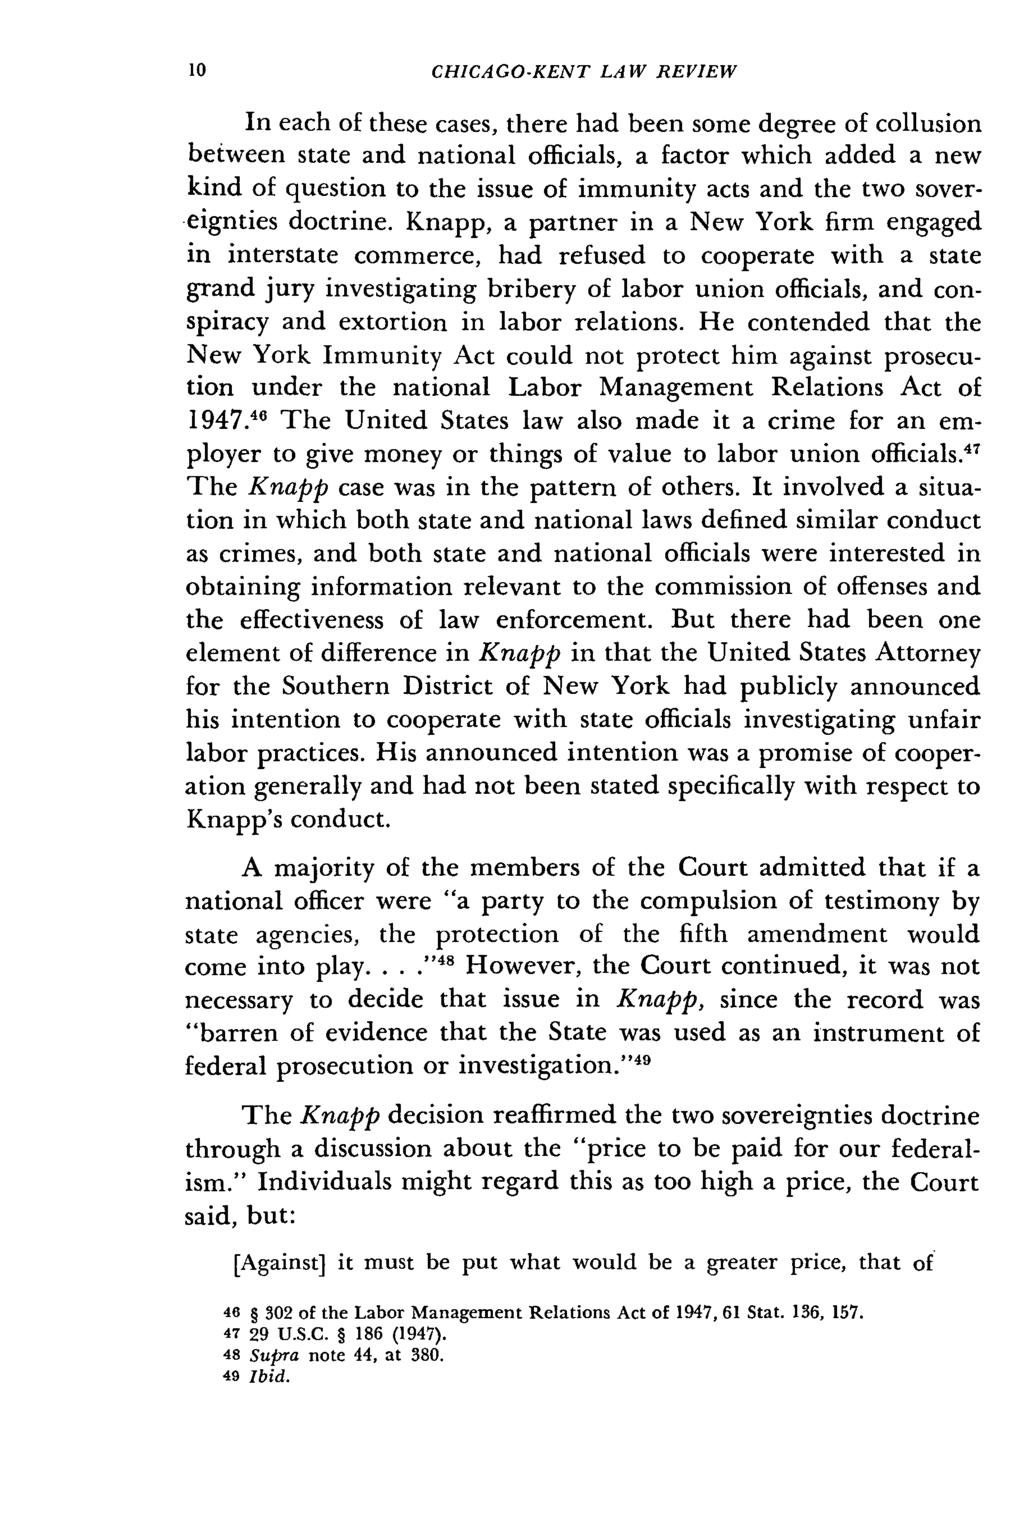 CHICAGO-KENT LAW REVIEW In each of these cases, there had been some degree of collusion between state and national officials, a factor which added a new kind of question to the issue of immunity acts